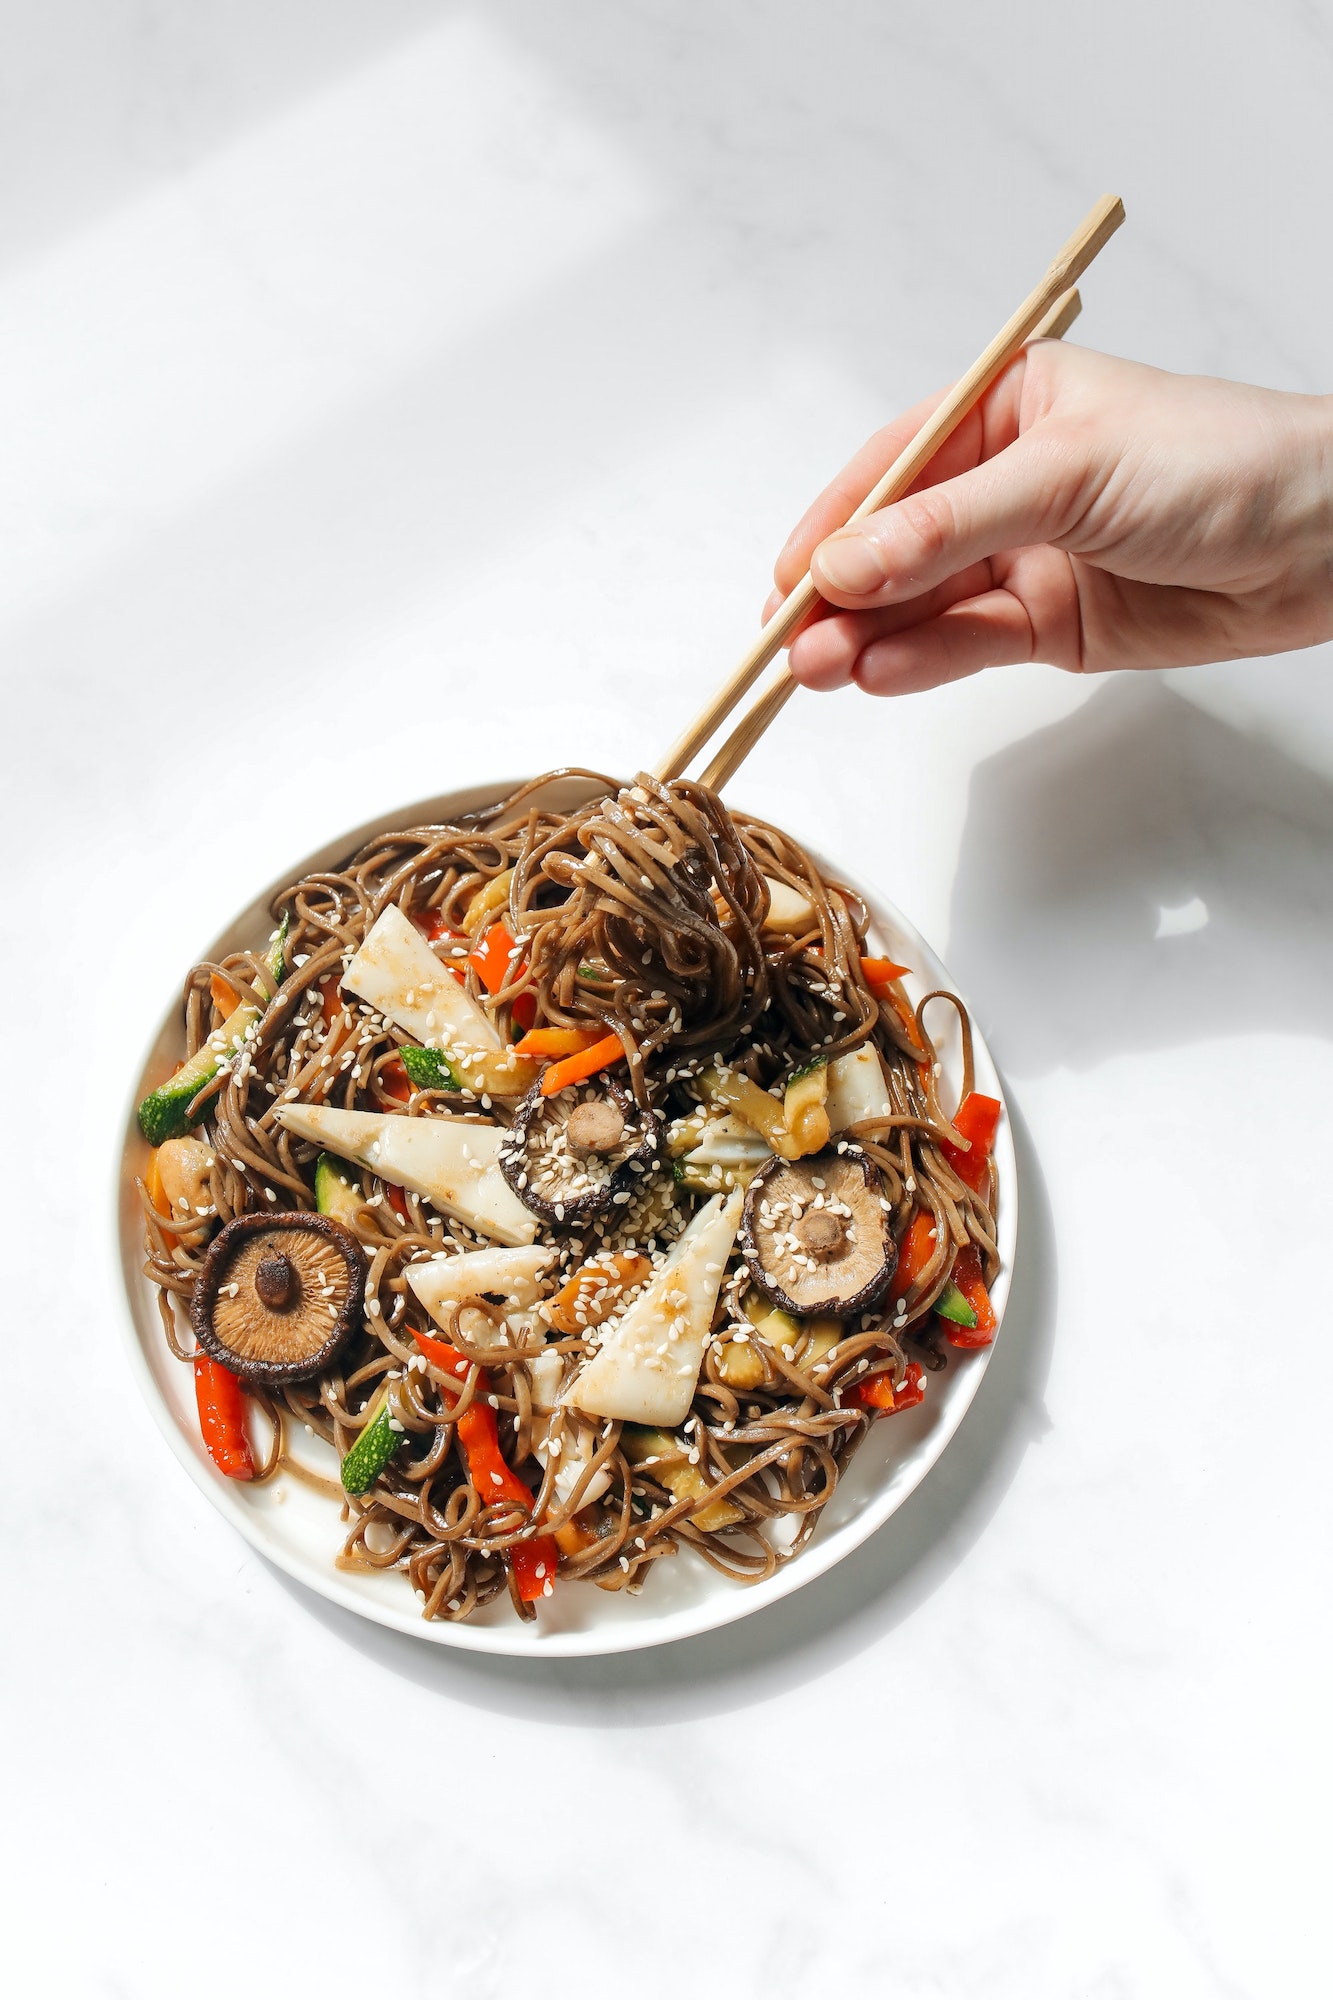 More than just flavor and texture, different types of noodles provide nutrients that help diners with varying health concerns